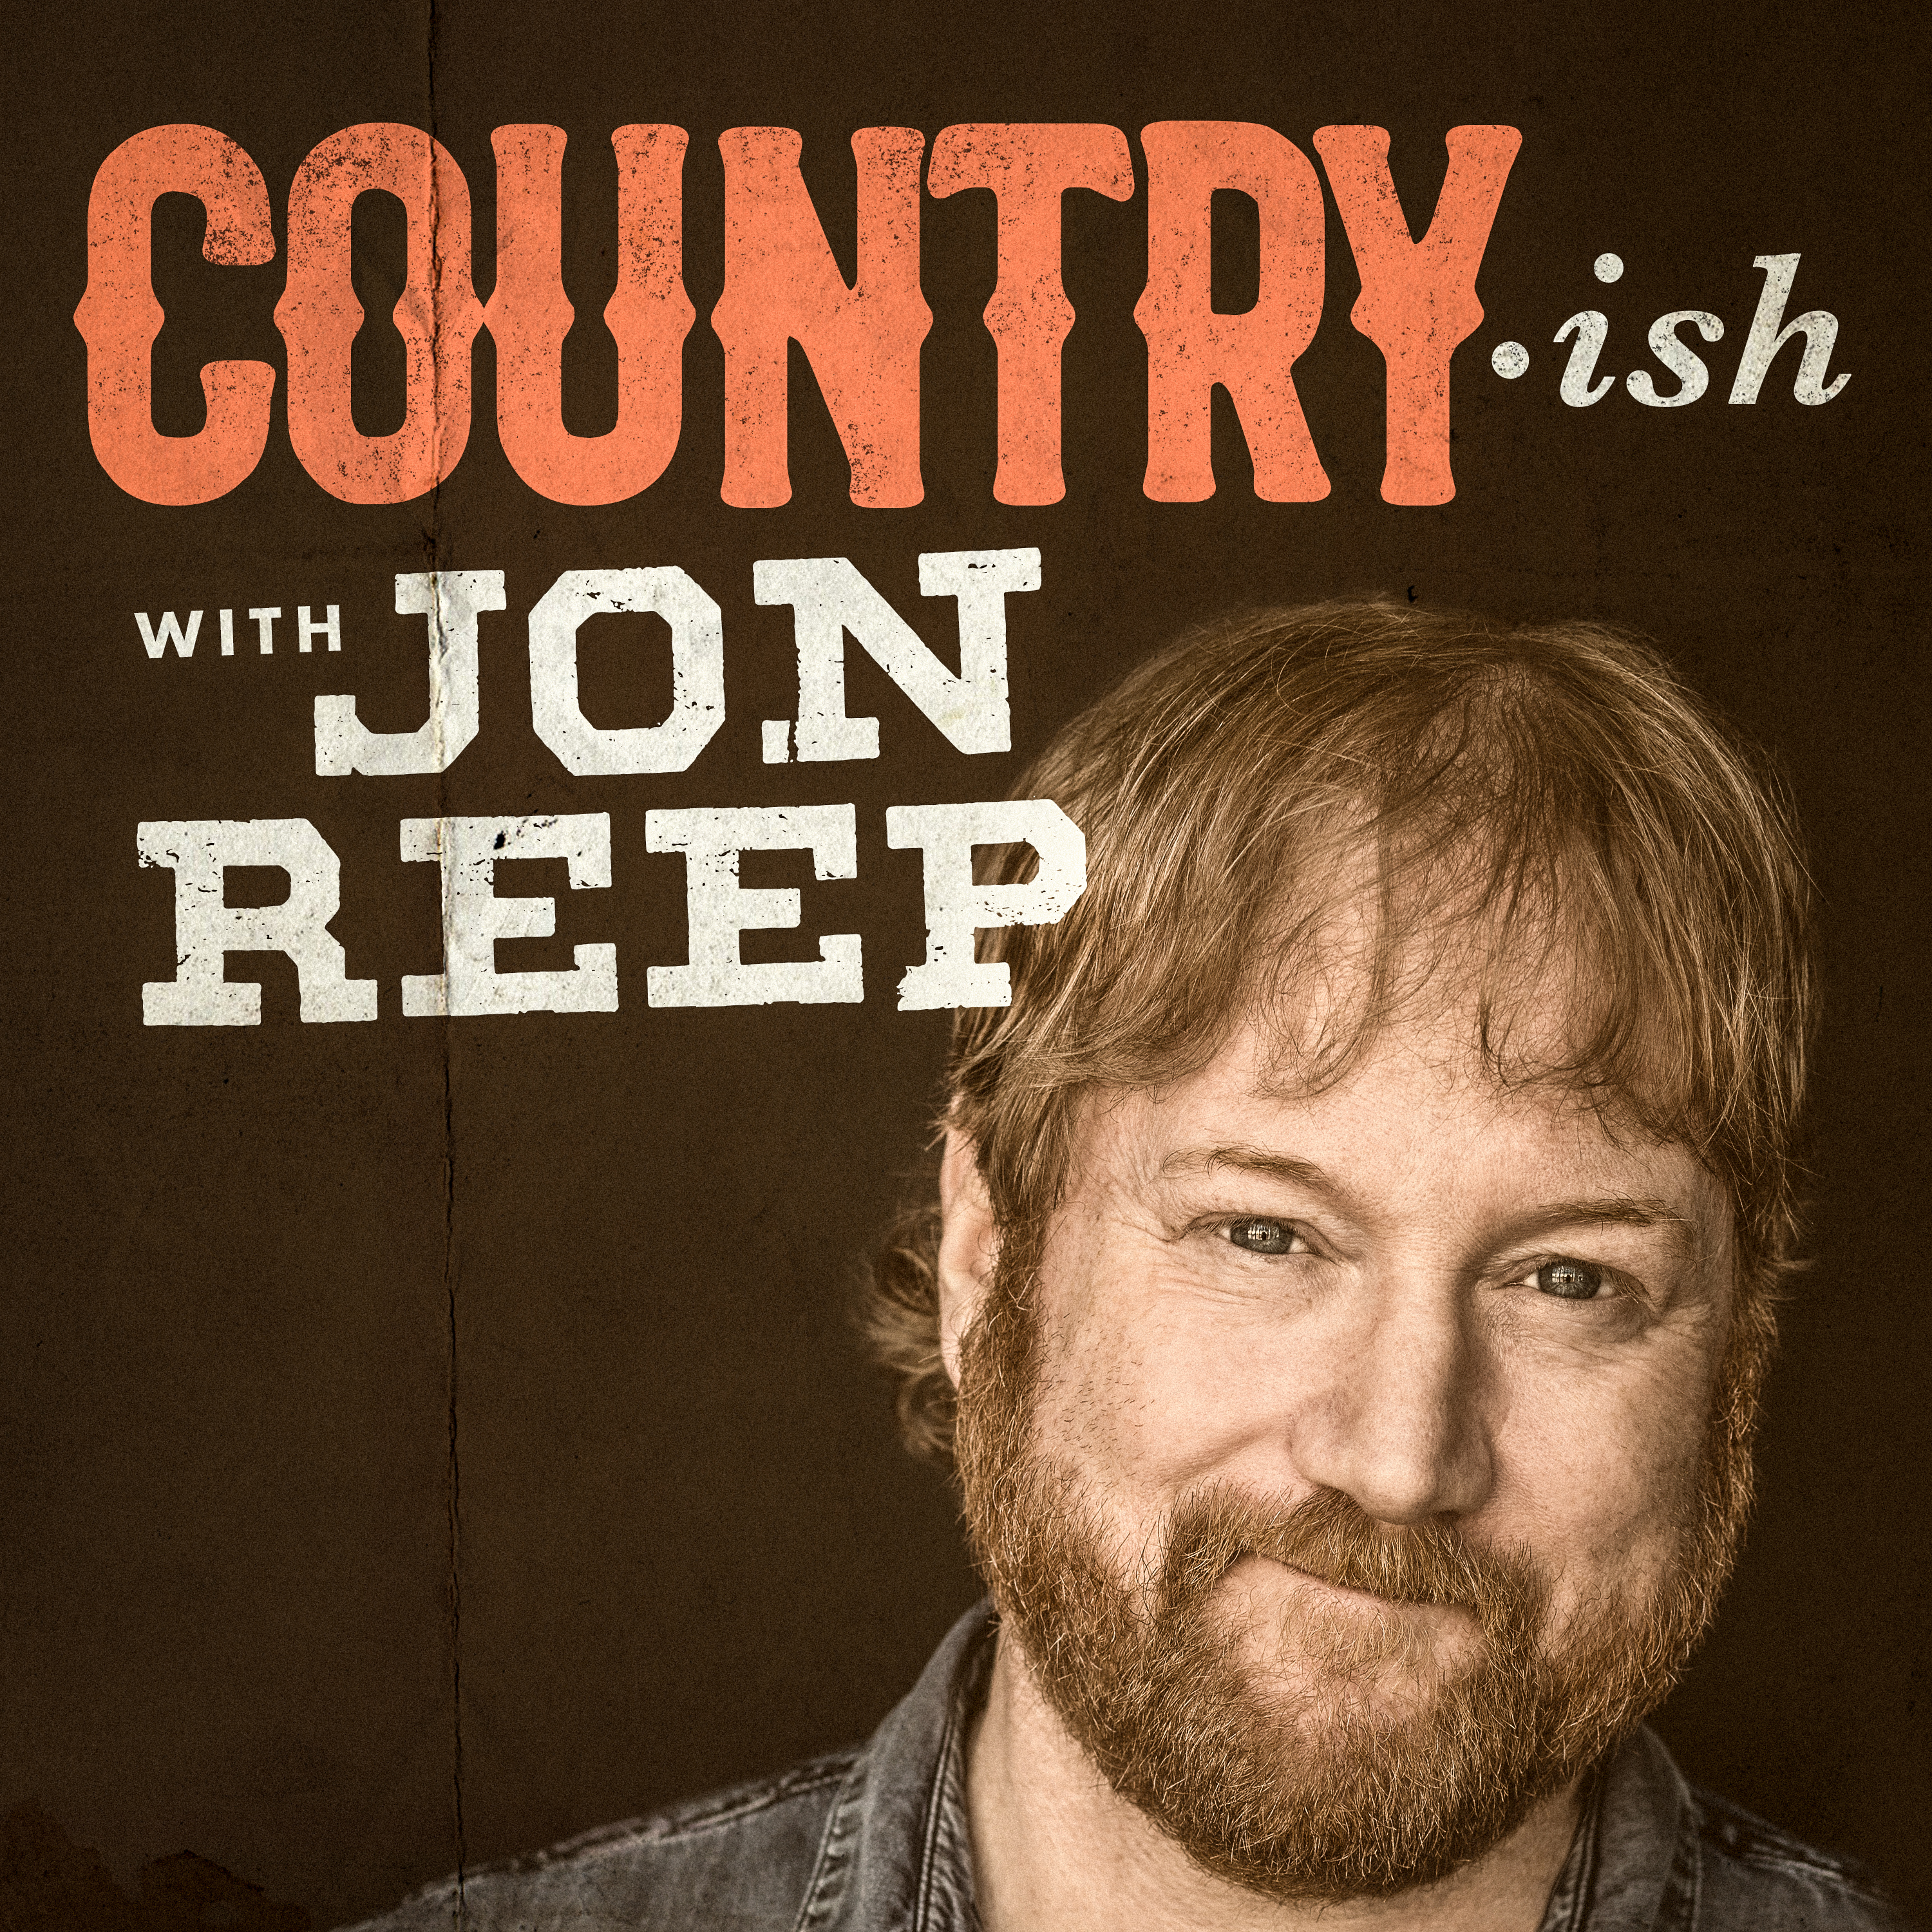 Chatting with Rick and Bubba LIVE!  - A Country-ish with Jon Reep Bonus Dish